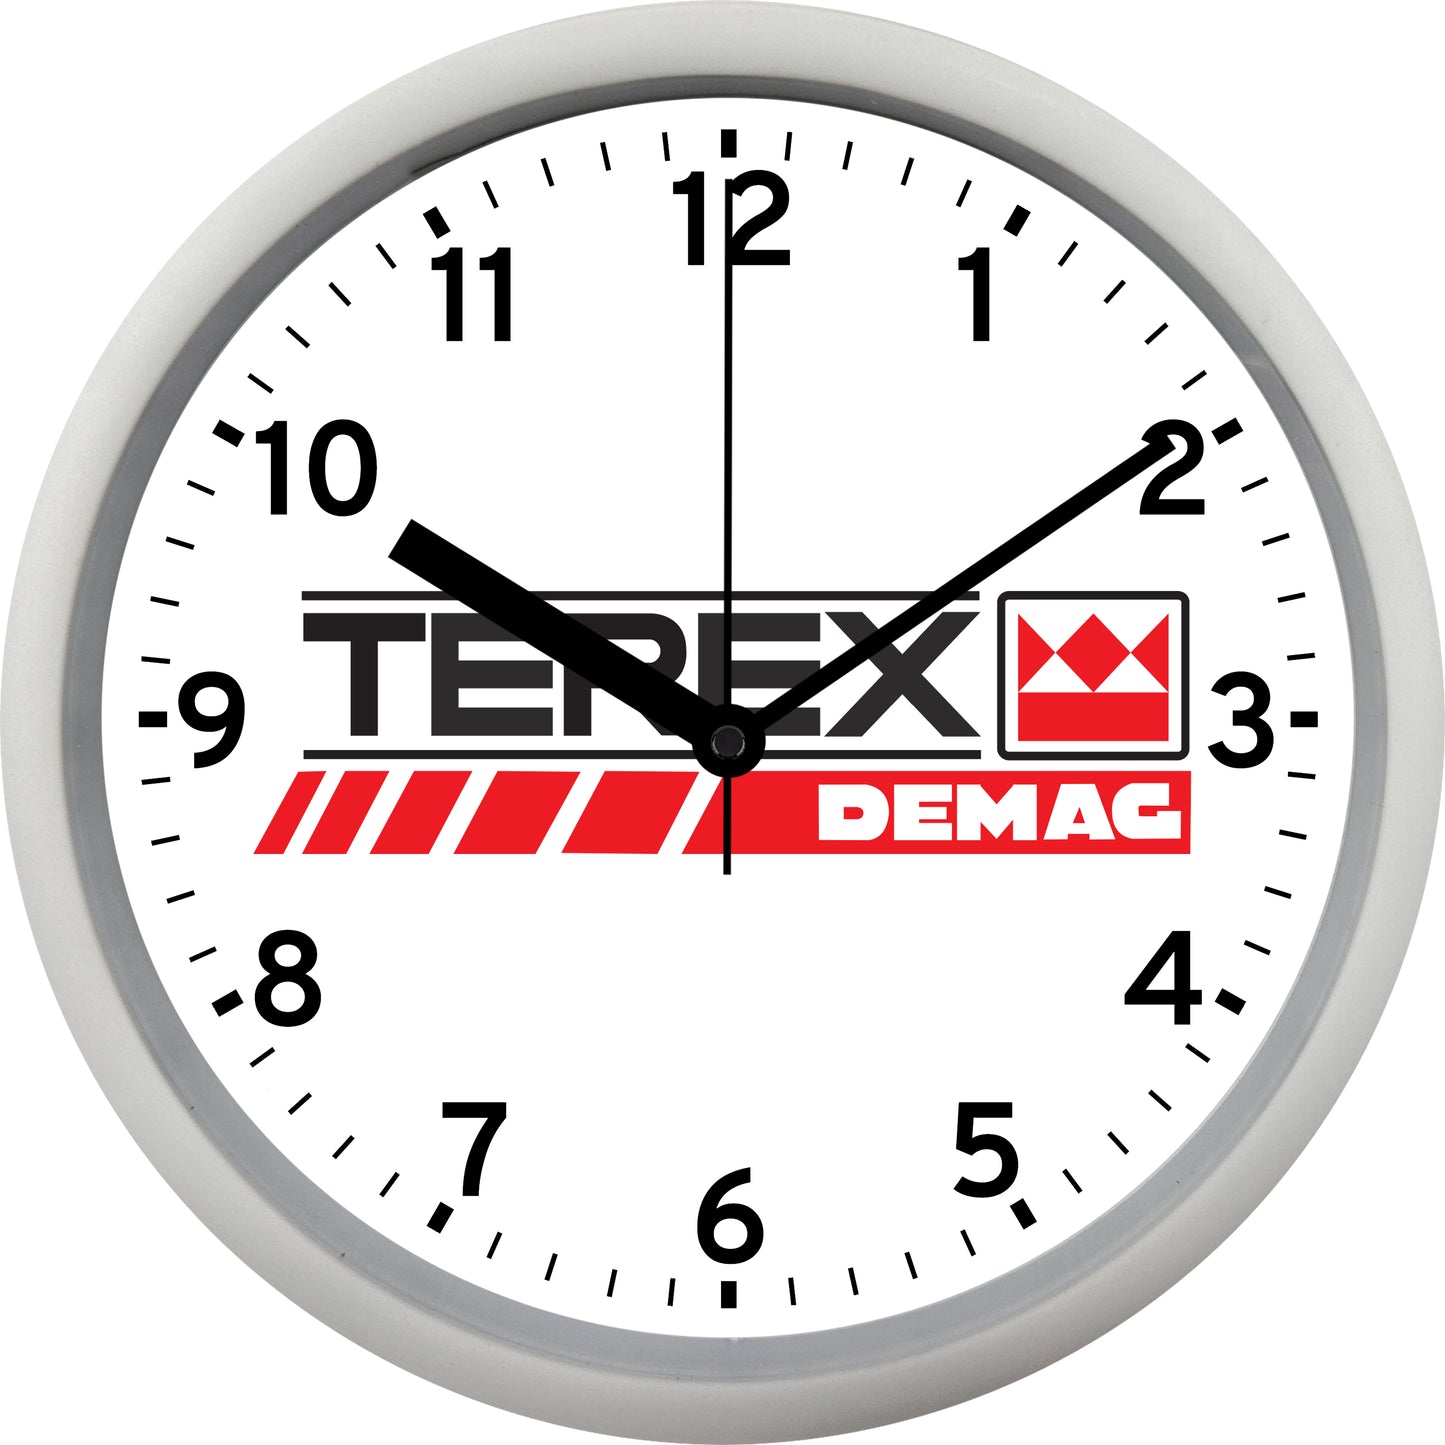 Demag by Terex Wall Clock